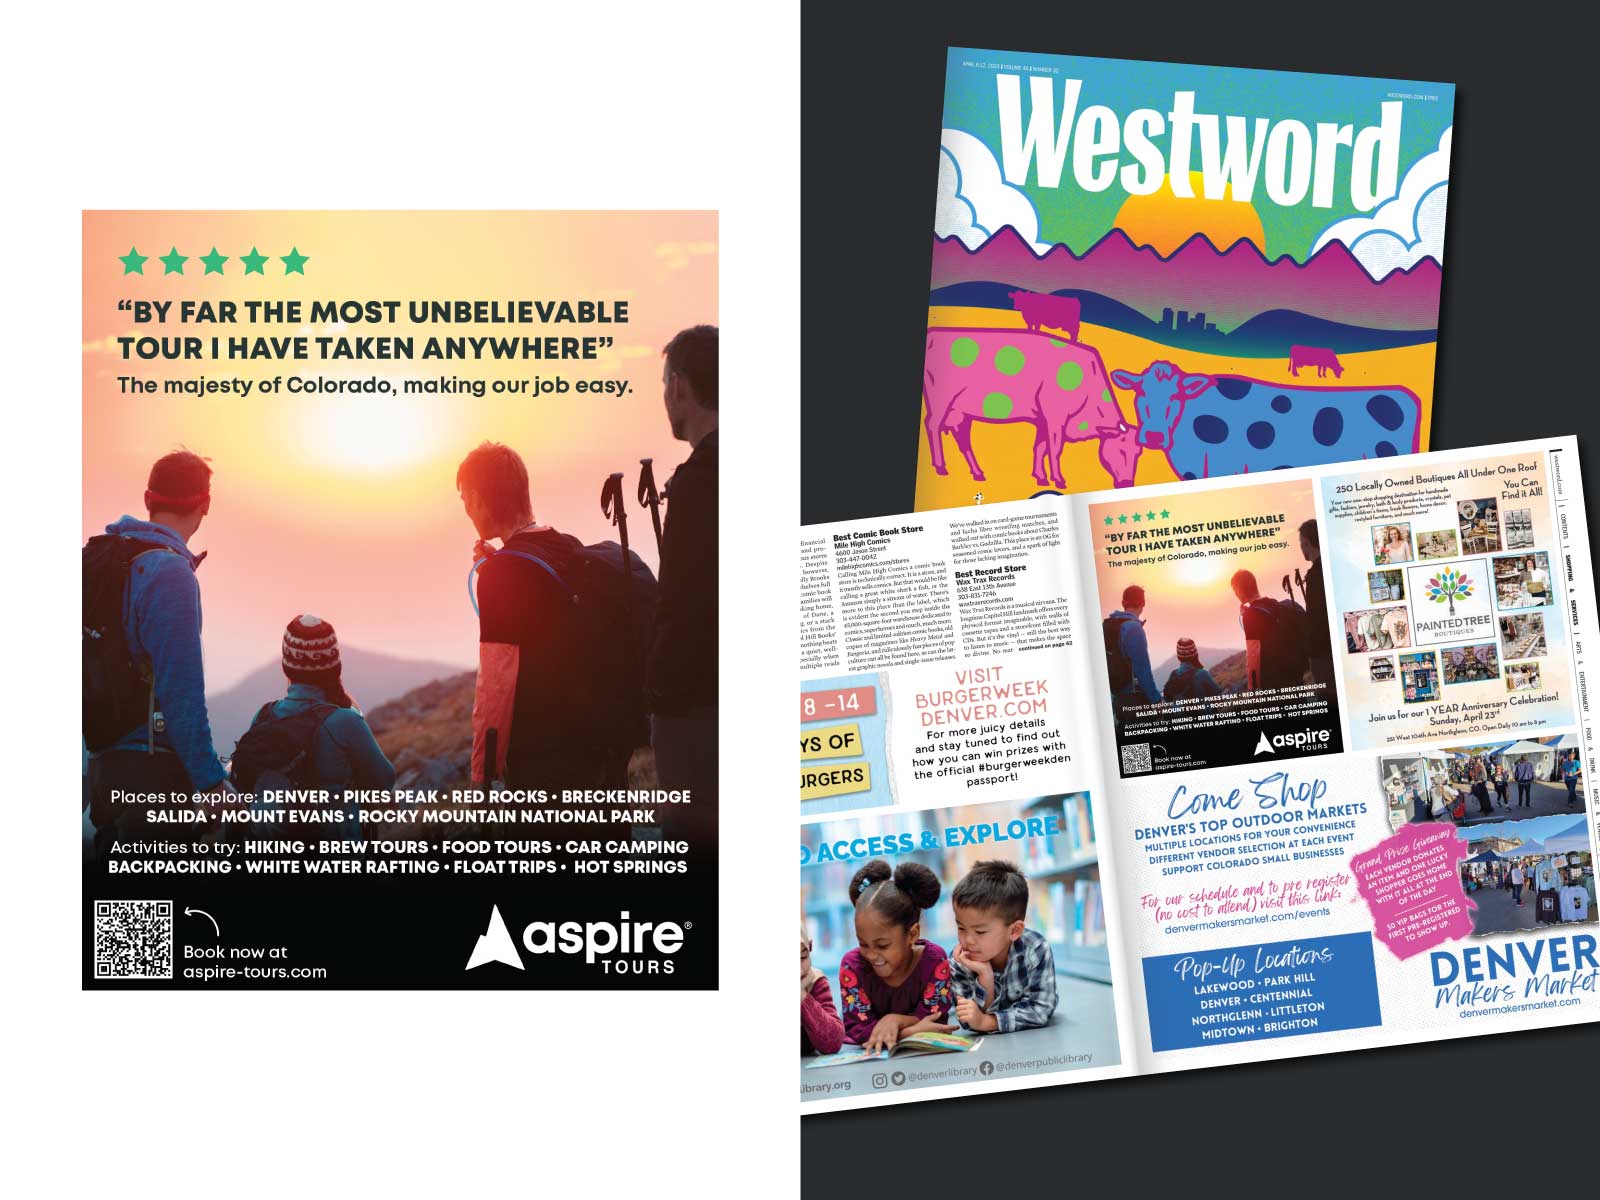 A print ad placement in Westword's Best of Denver issue showing four people looking at the sunset on top of Long's Peak